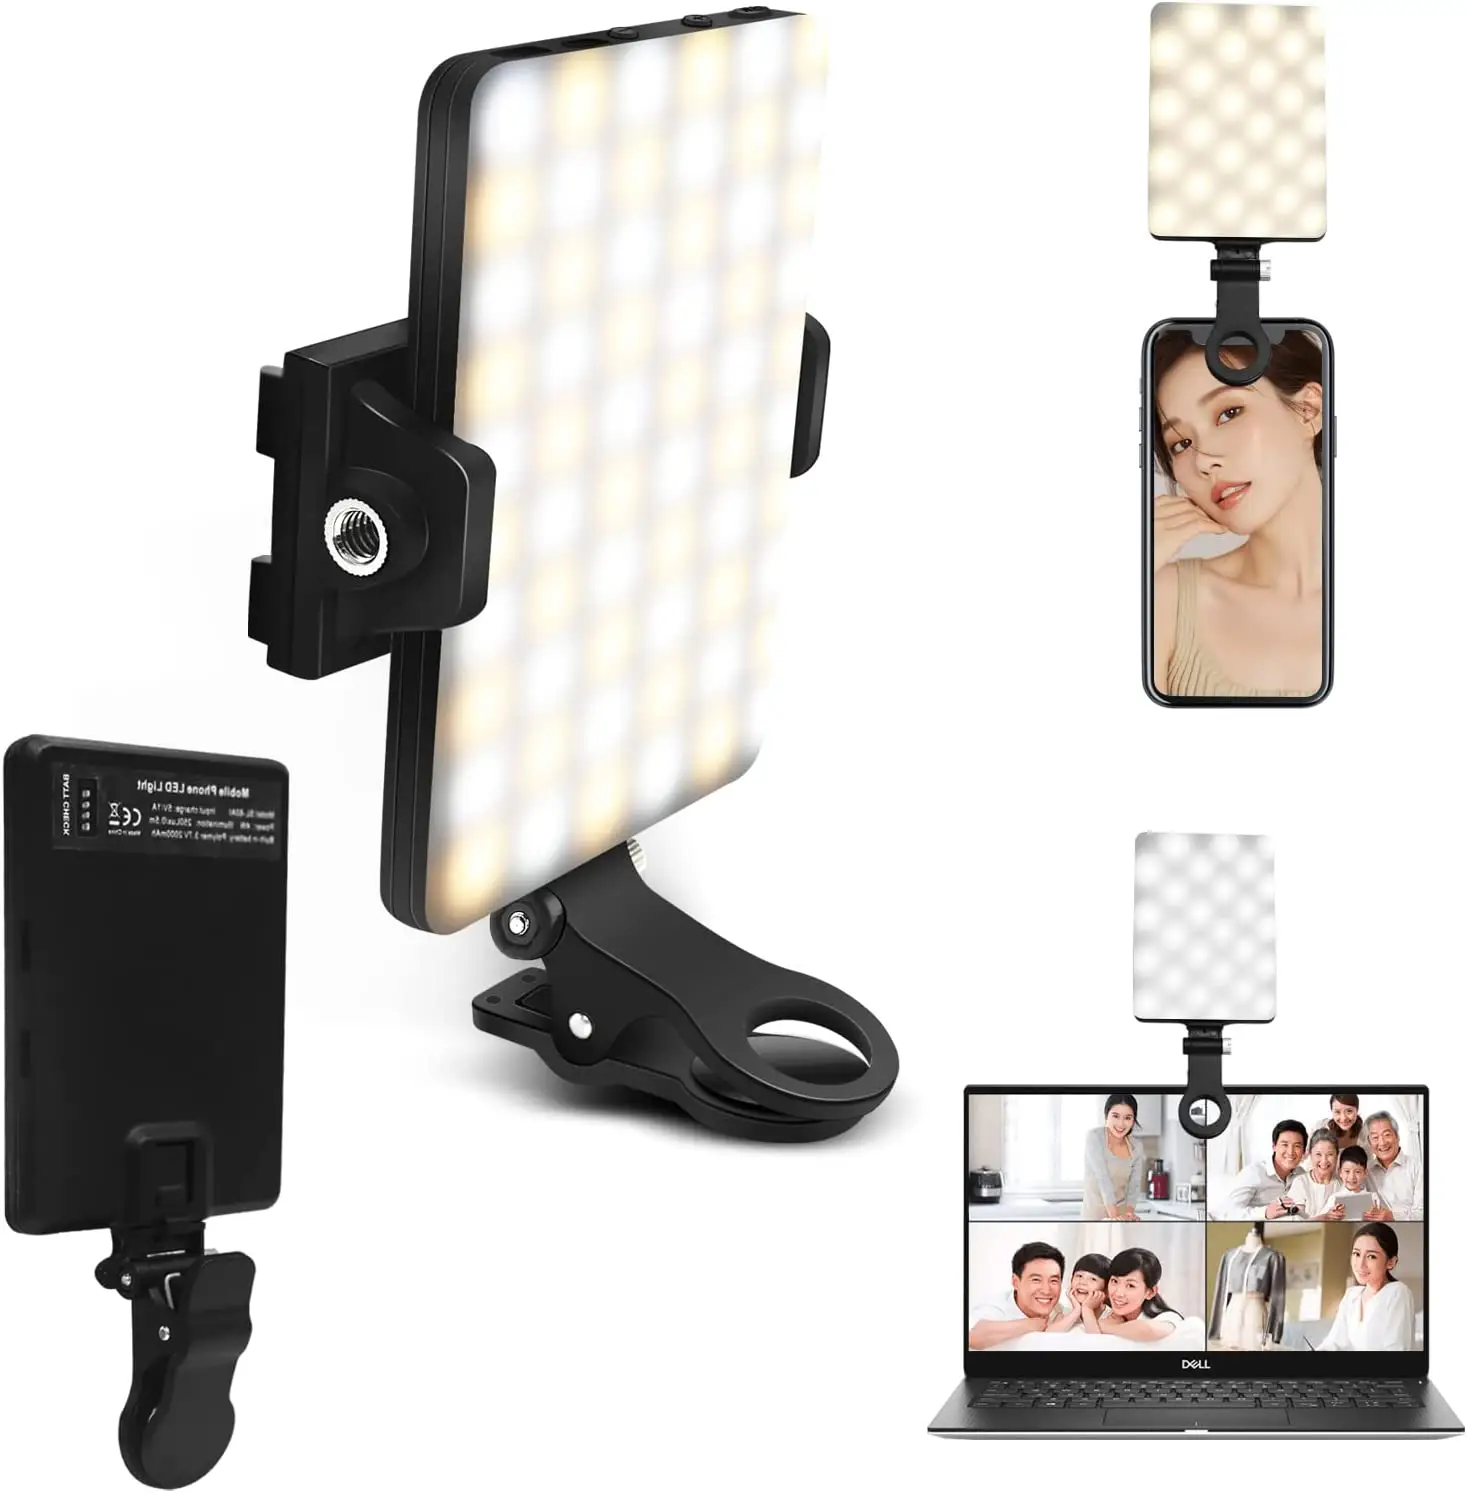 High Power Rechargeable Fill Video Light for Phone iPhone Android iPad Laptop for Makeup Selfie Vlog Video Conference